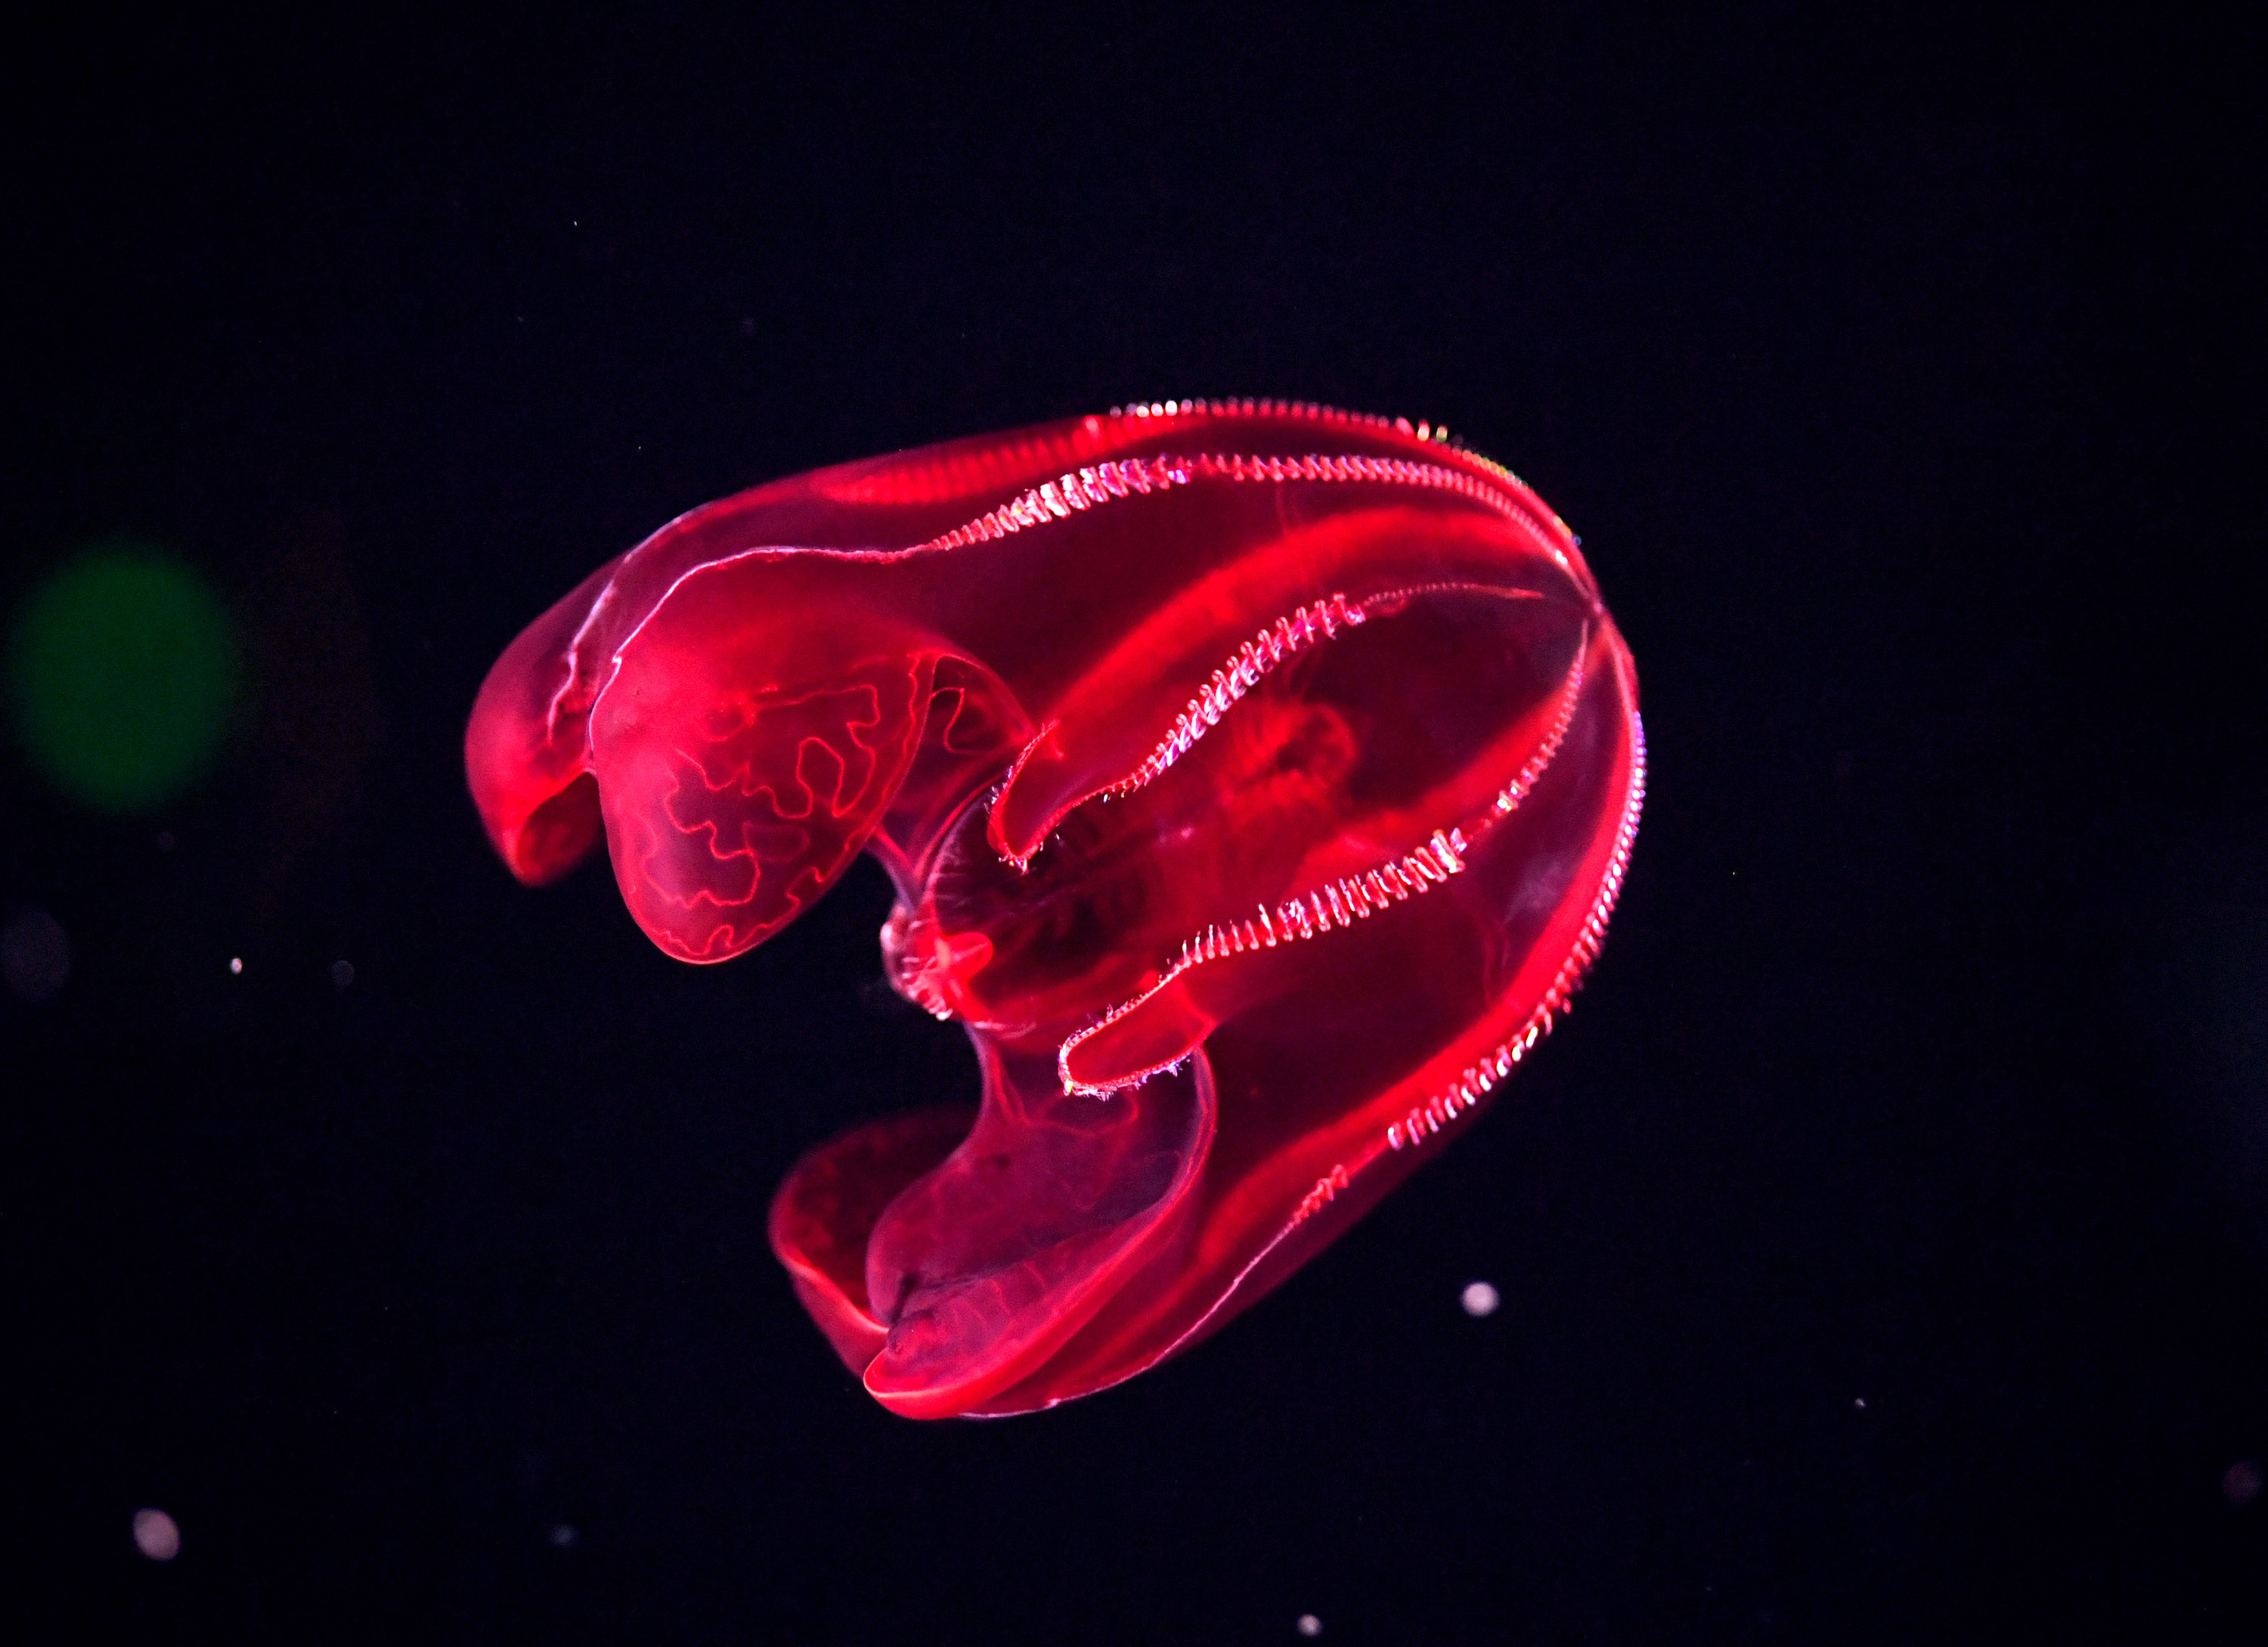 A red bloody-belly comb jelly swimming in its tank